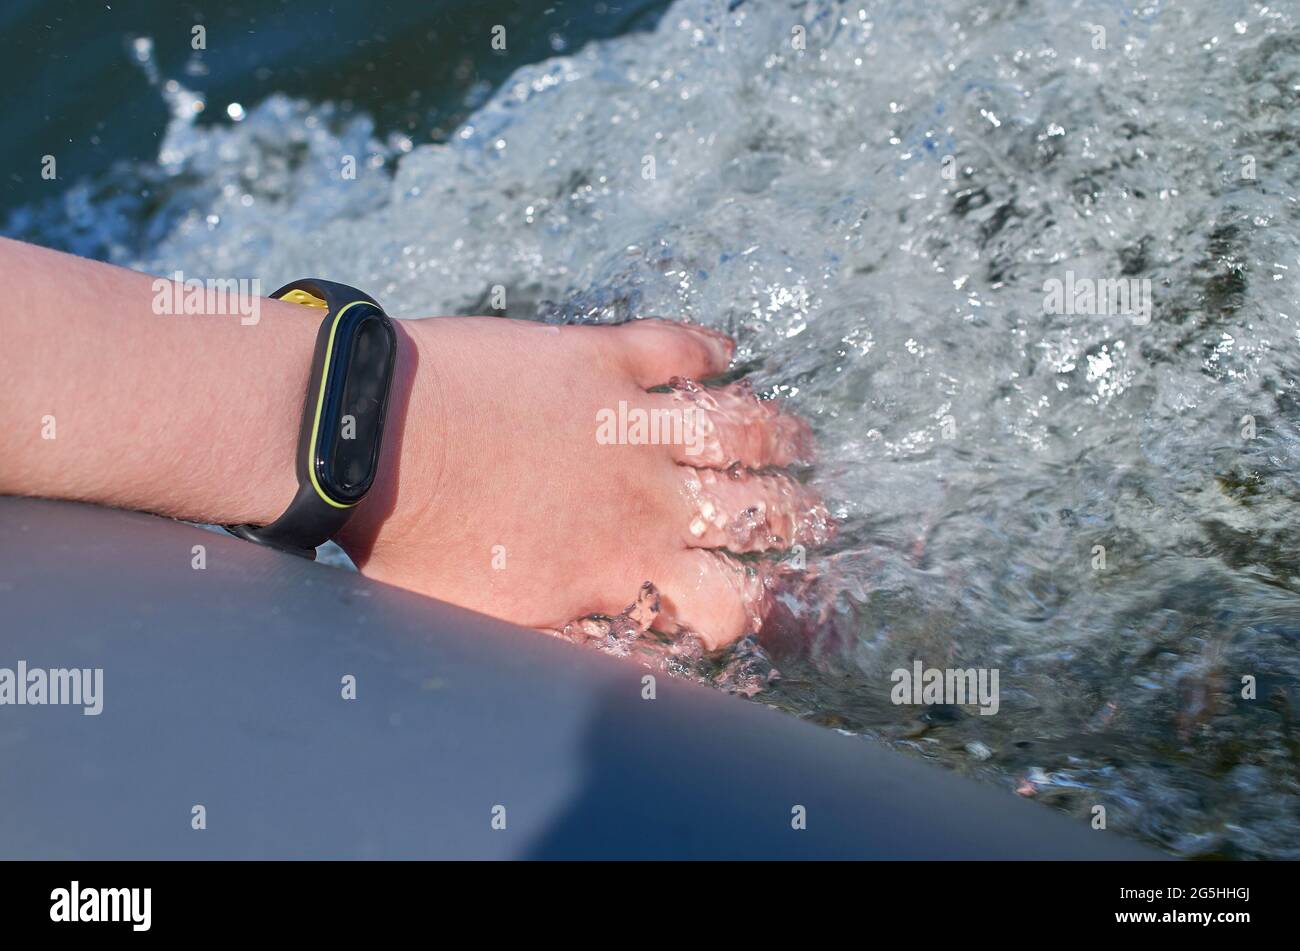 A teenager's hand with a waterproof fitness bracelet is lowered into the water. Stock Photo